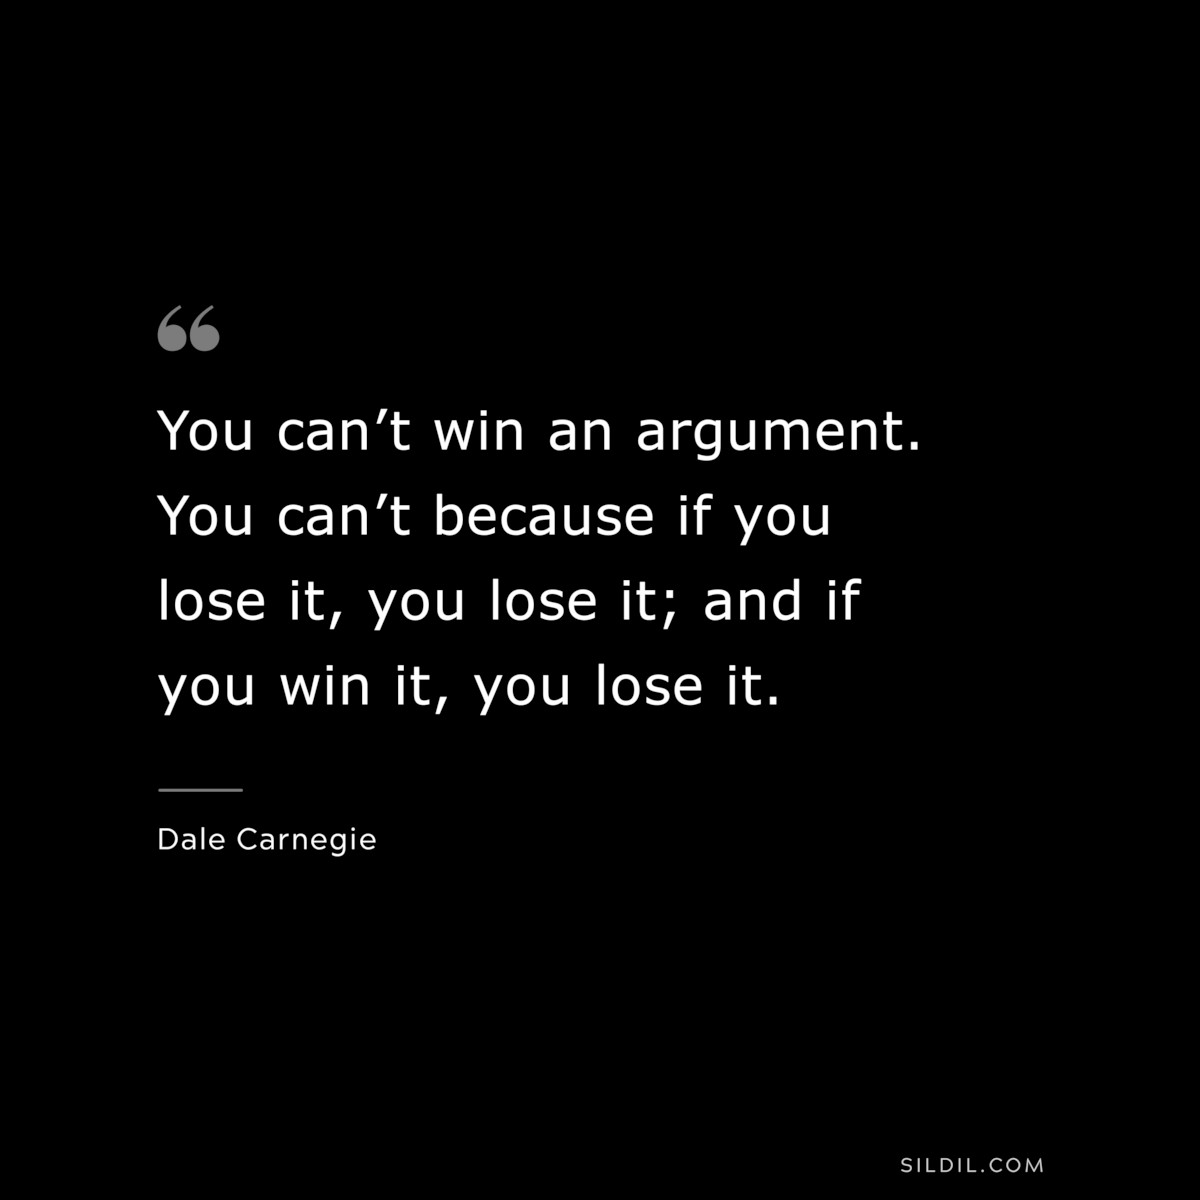 You can’t win an argument. You can’t because if you lose it, you lose it; and if you win it, you lose it.― Dale Carnegie